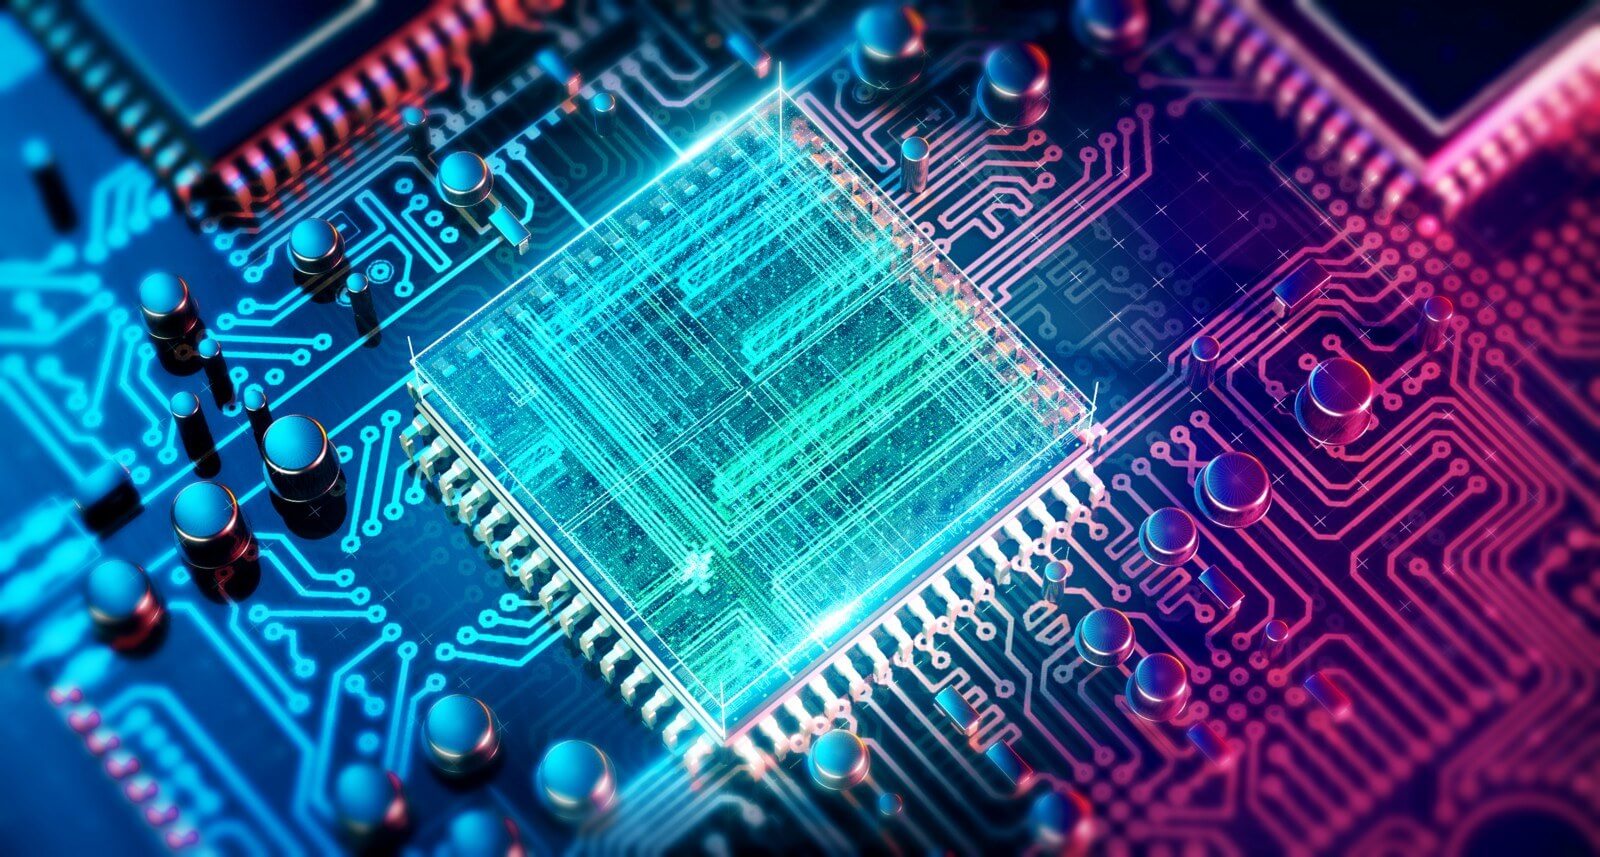 TSMC partners with Taiwan's Ministry of Science and Technology to create a quantum computer